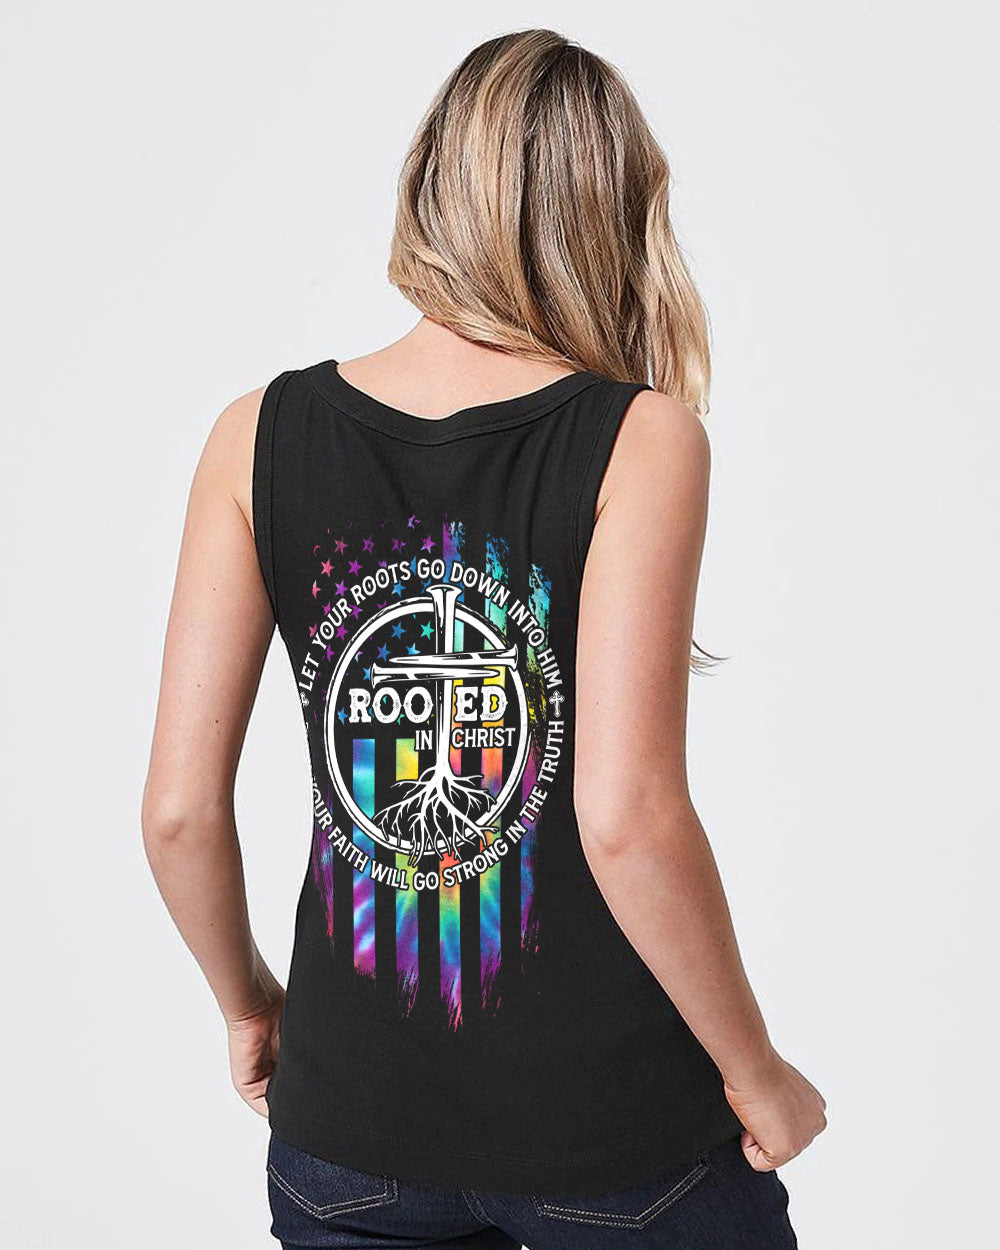 Let Your Roots Go Down Into Him Women's Christian Tanks